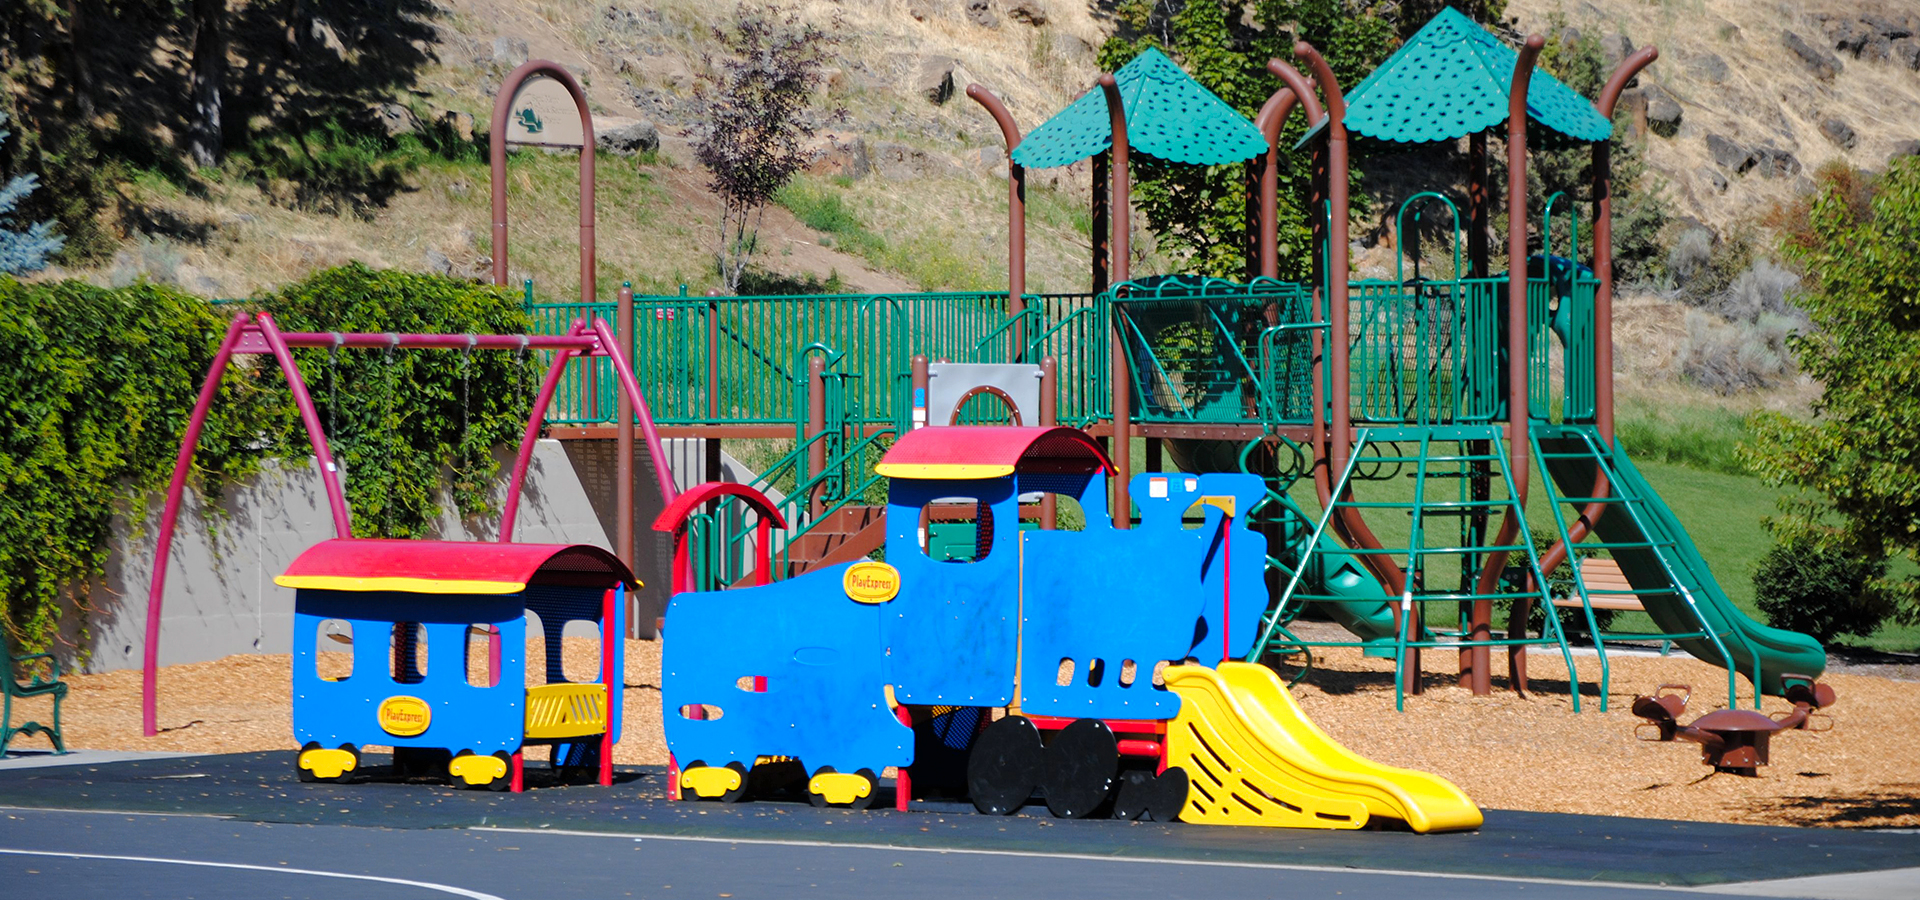 A train play structure at Al Moody Park.